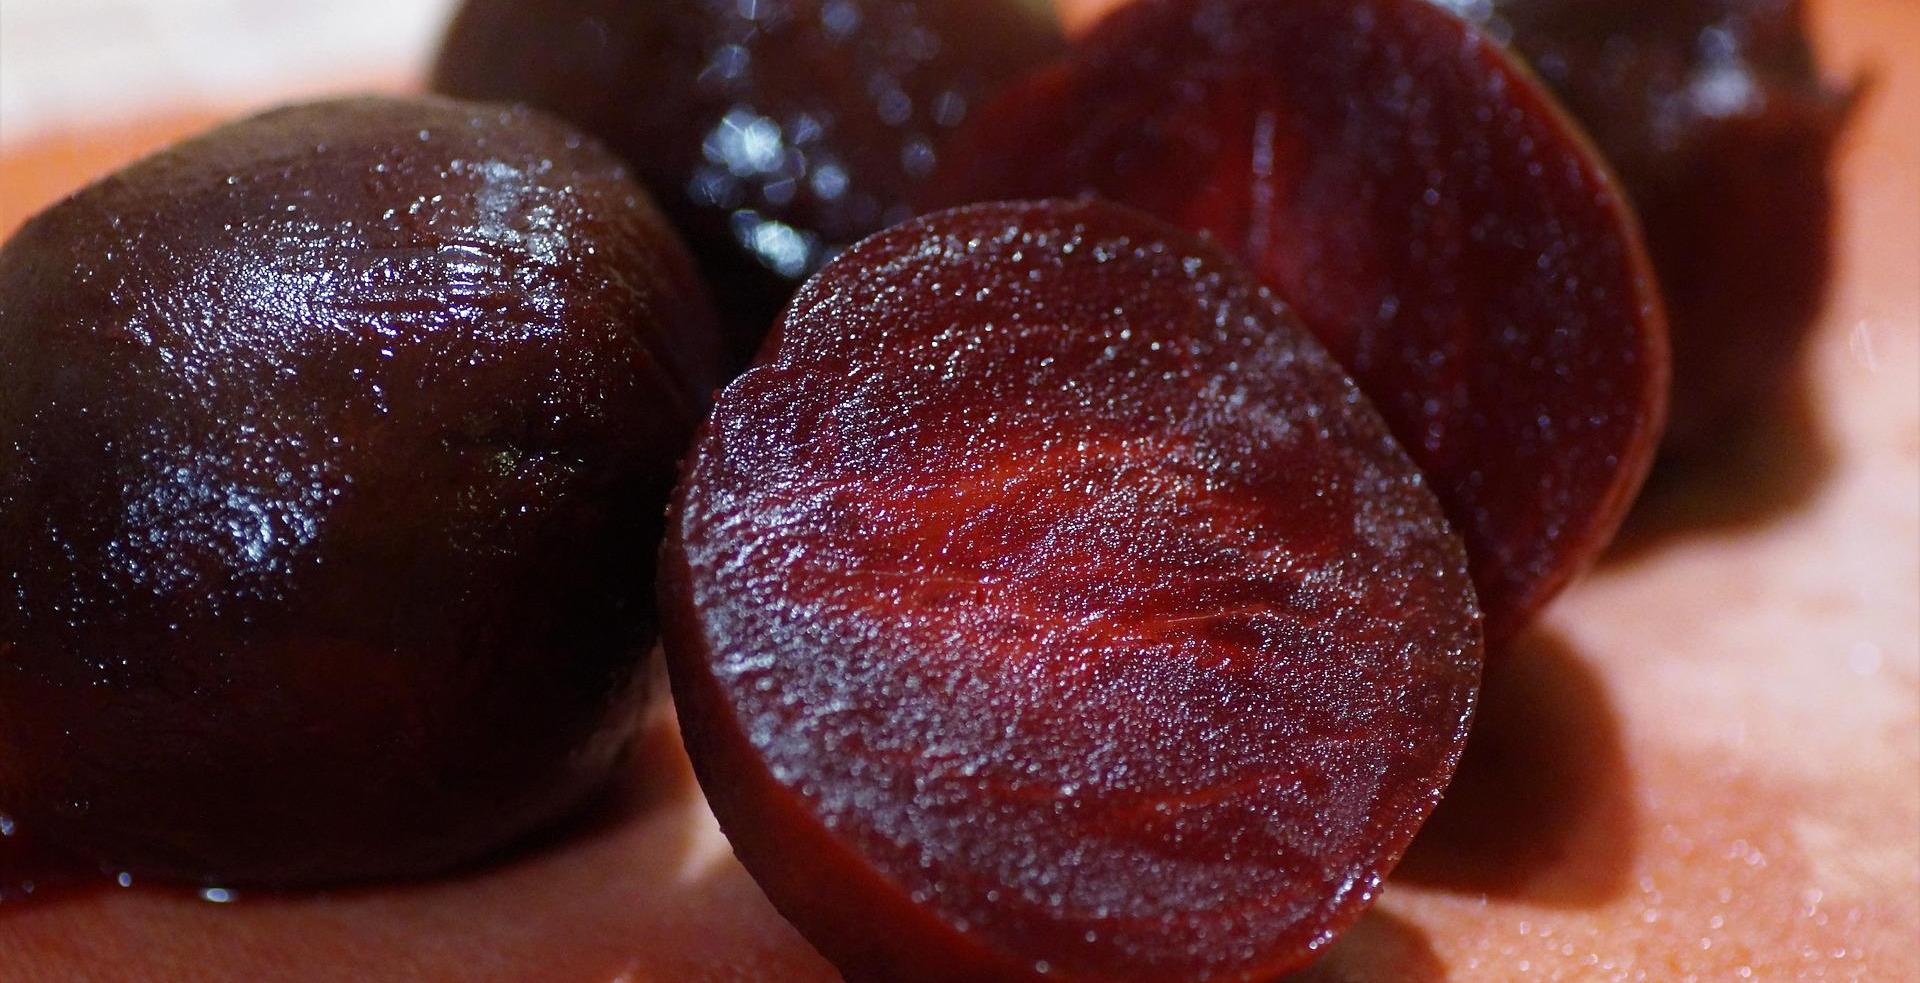 Oven Roasted Beets